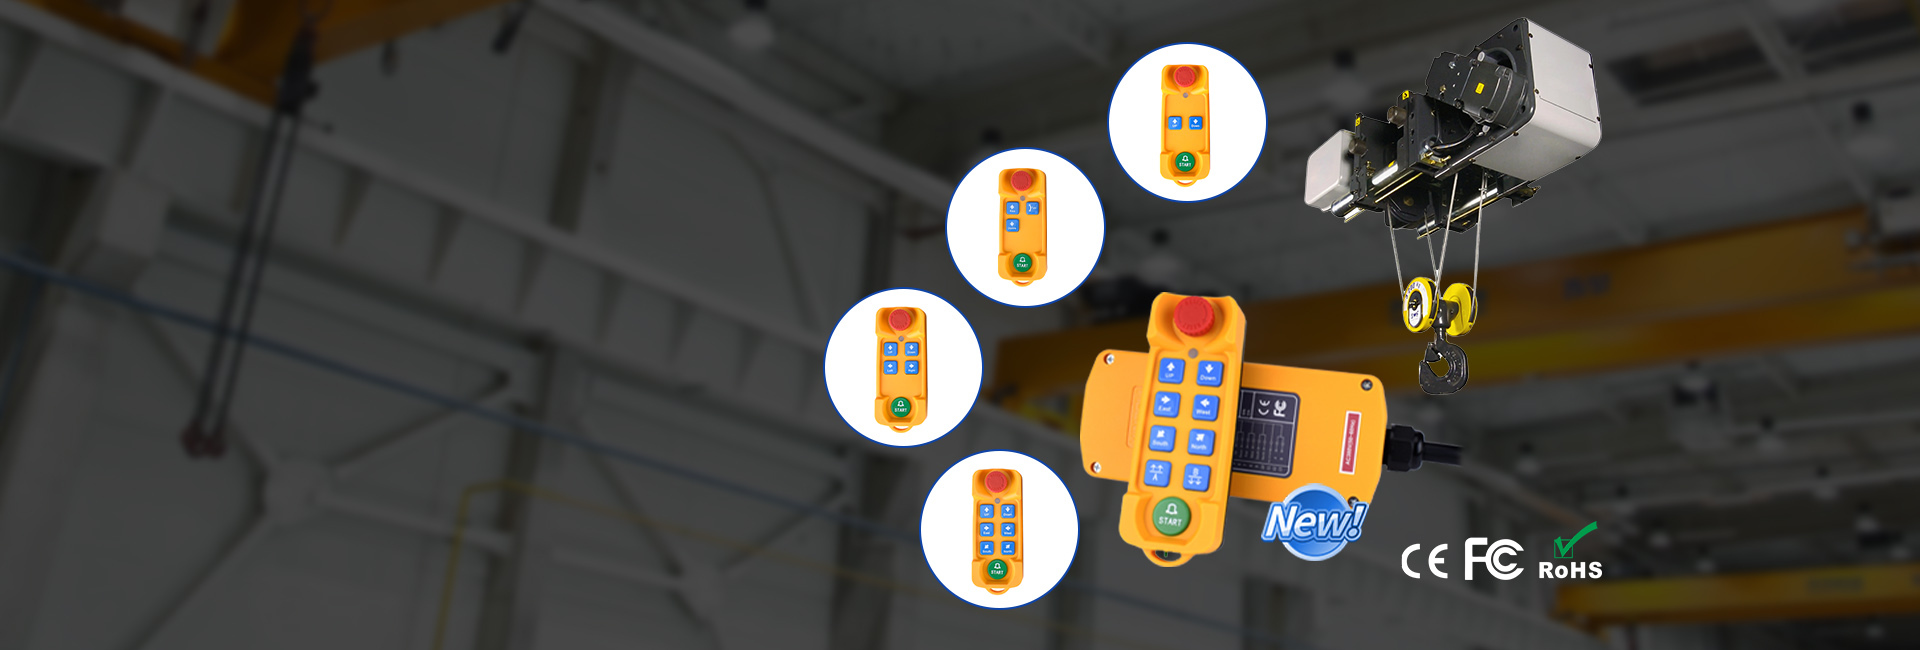 industrial wireless remote control